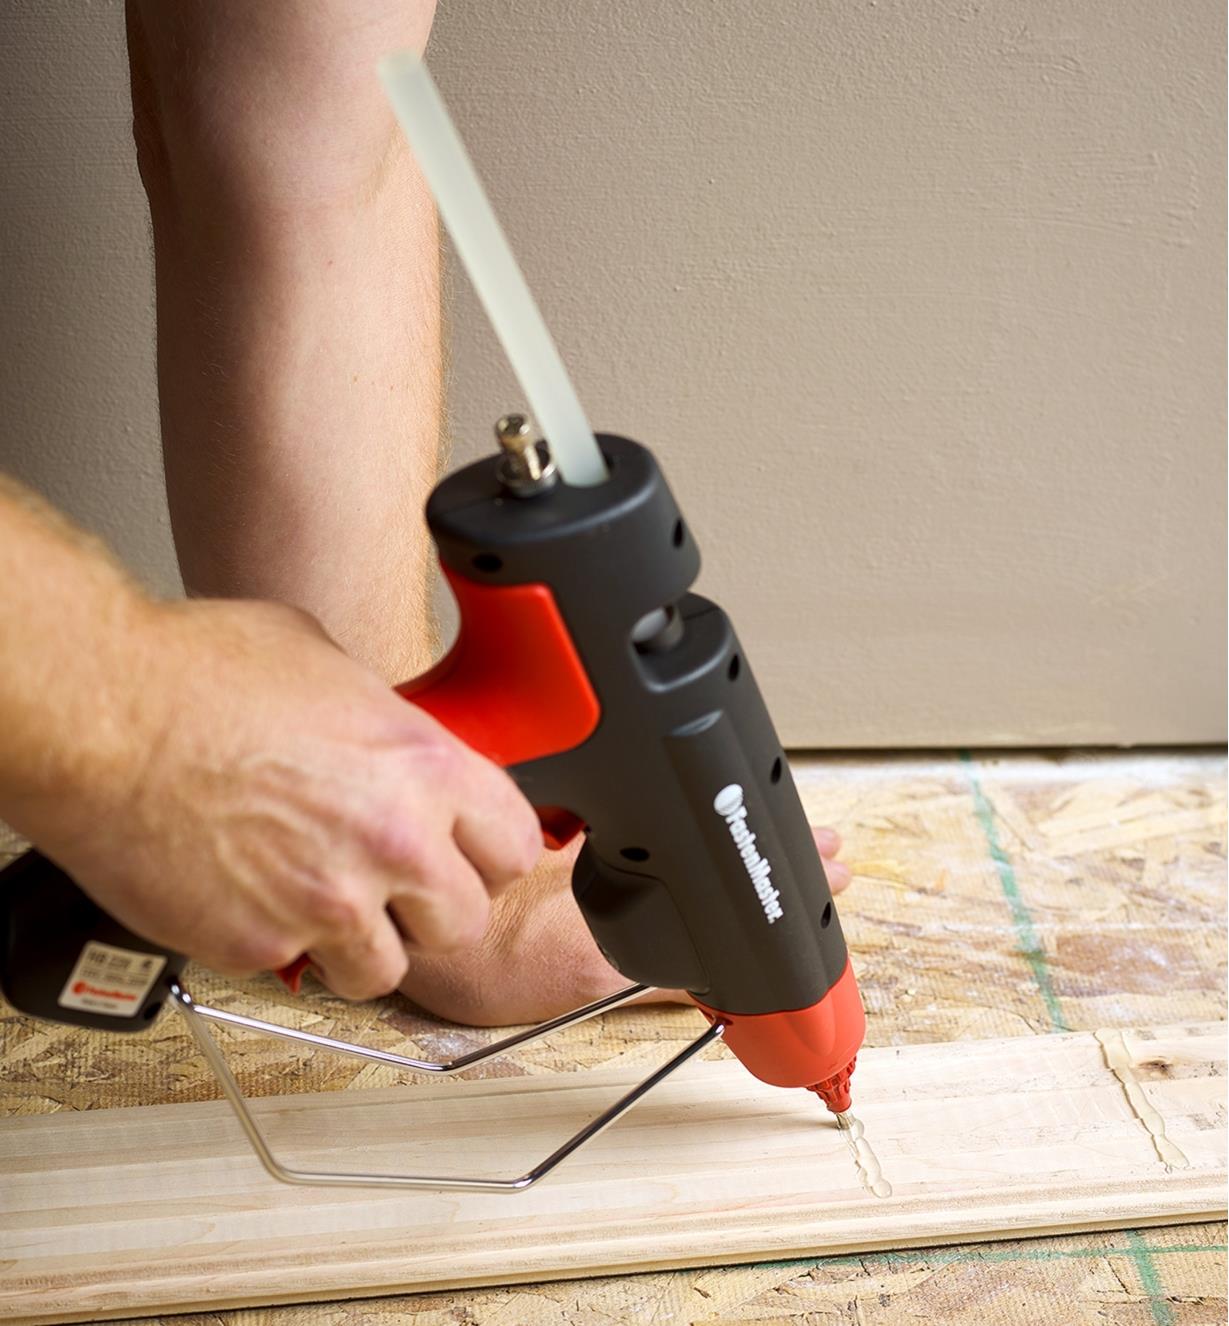 A FastenMaster pro hot-melt gun being used to apply glue to a piece of wooden flooring